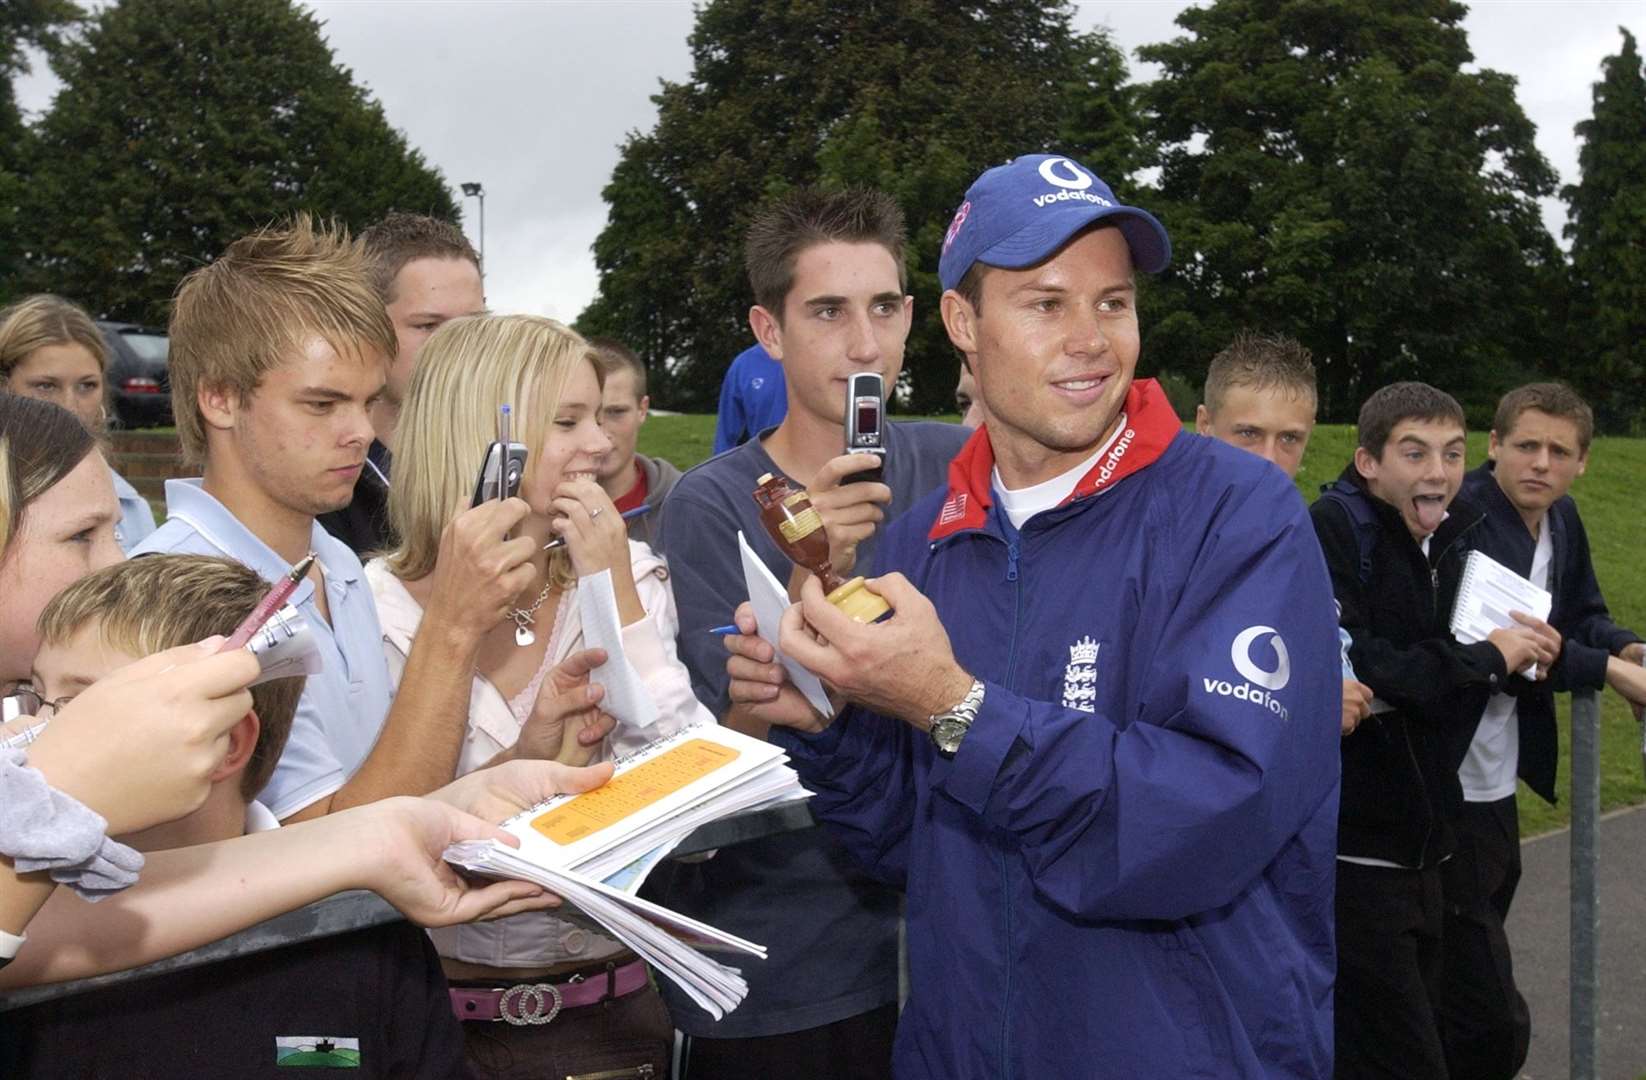 England Ashes hero Geraint Jones in 2005 busy signing autographs at Canterbury High School after the team's incredible series win over the Aussies